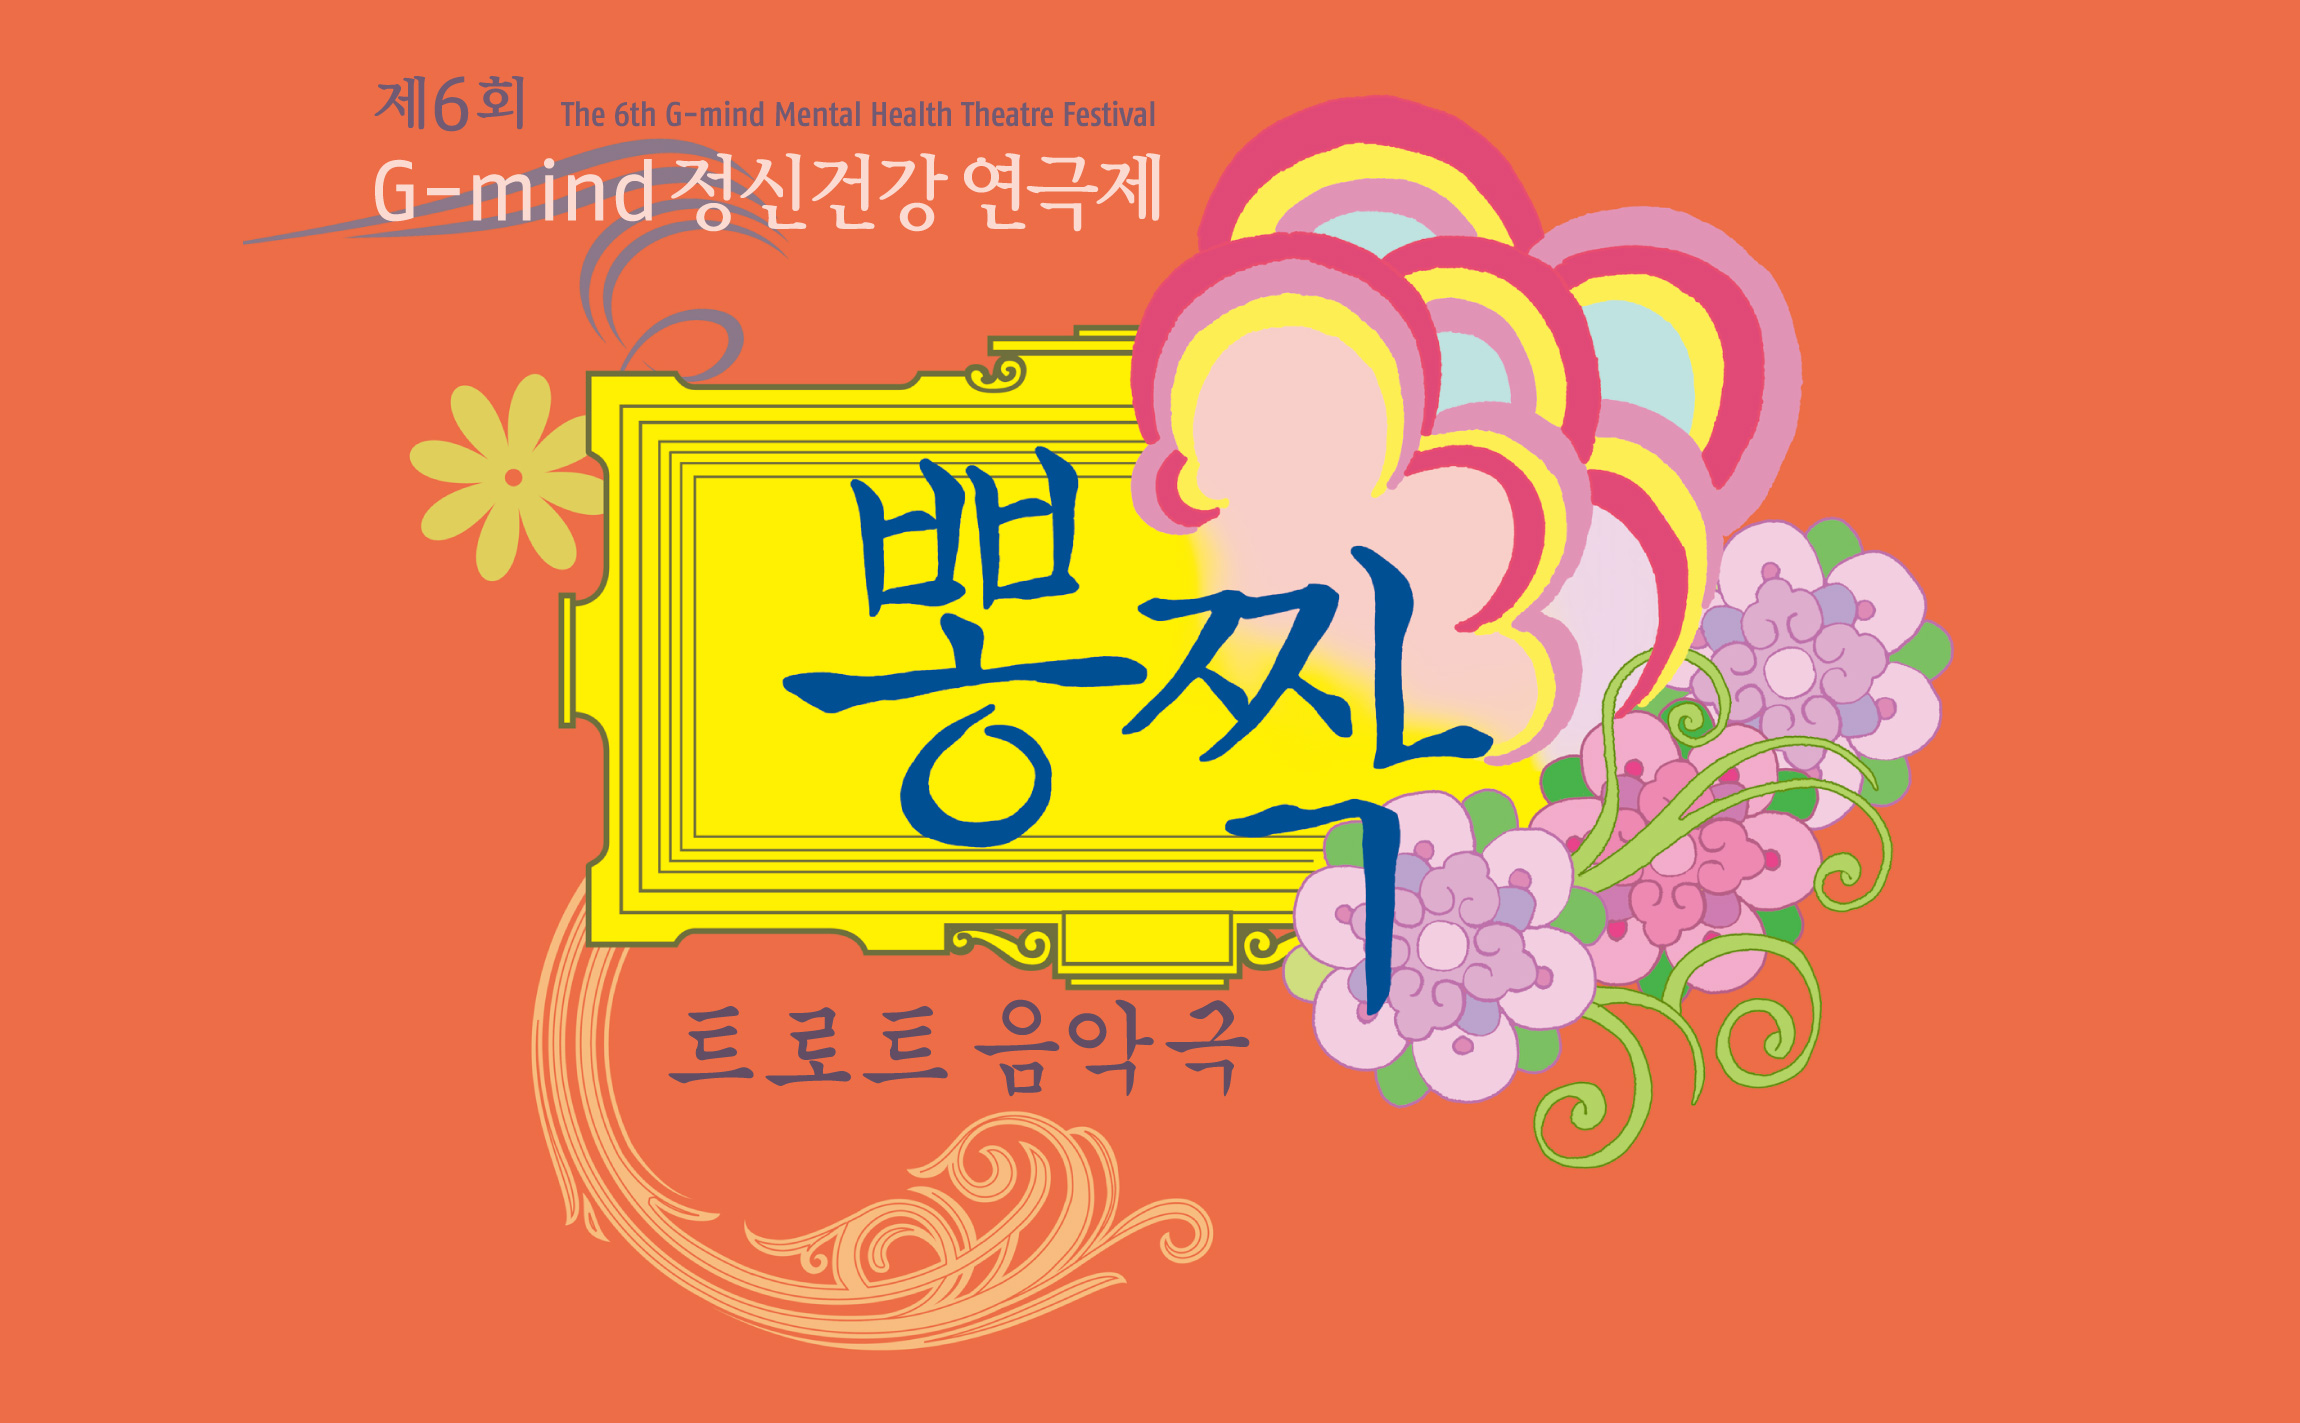 Gmind Theatre Festival Gyeonggi Province Center Posters & Banners gmind-theatre-3.jpg